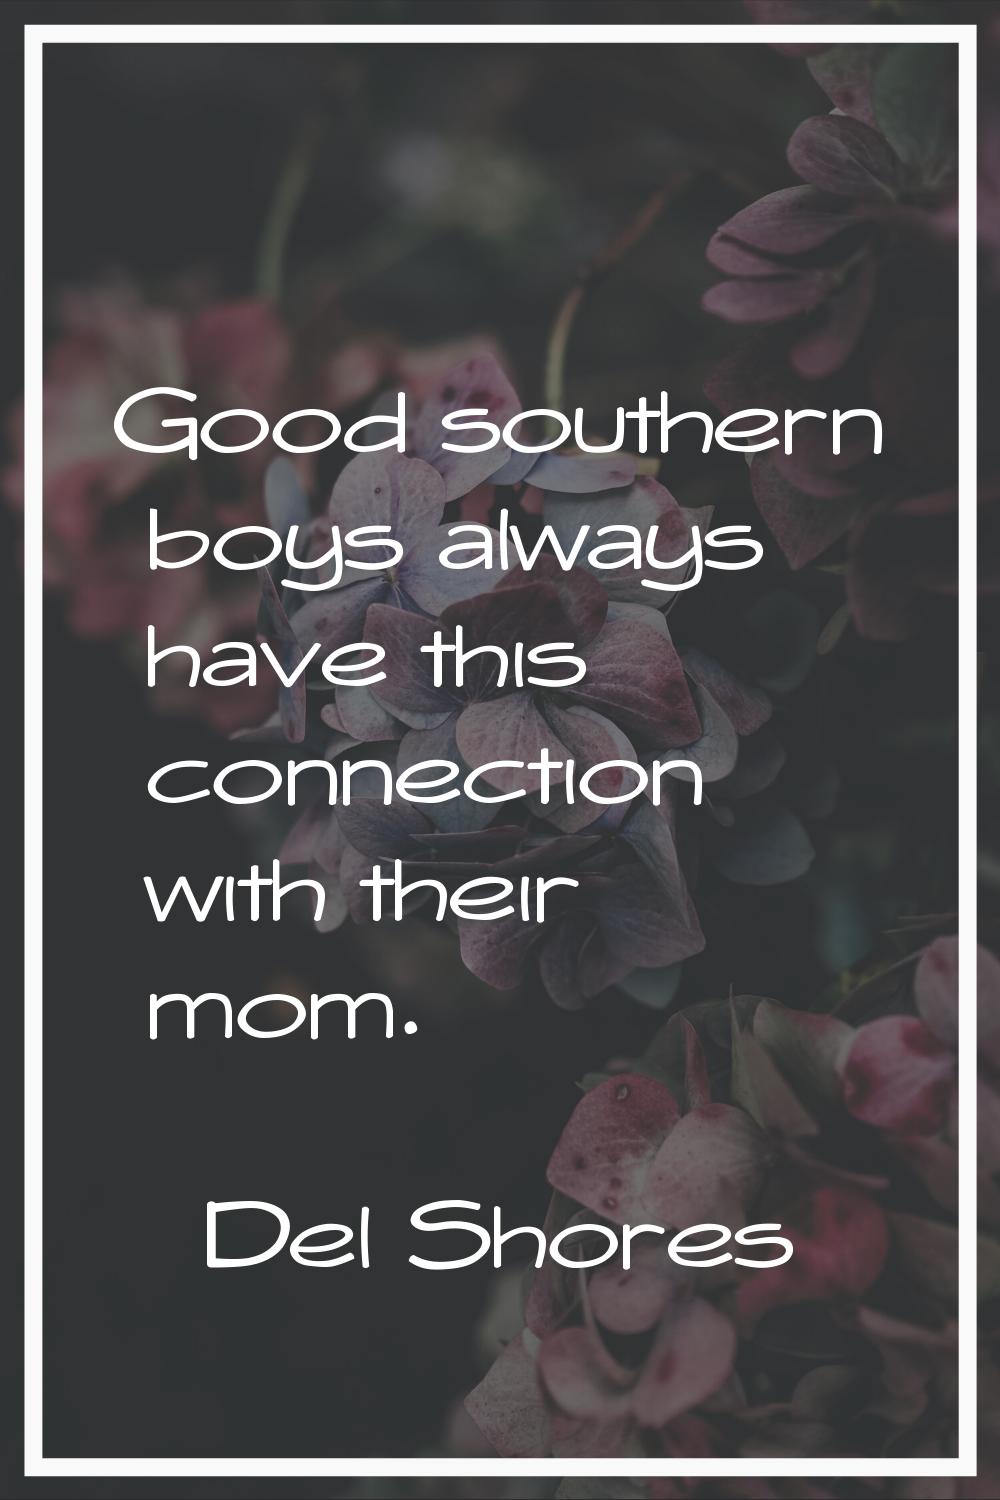 Good southern boys always have this connection with their mom.